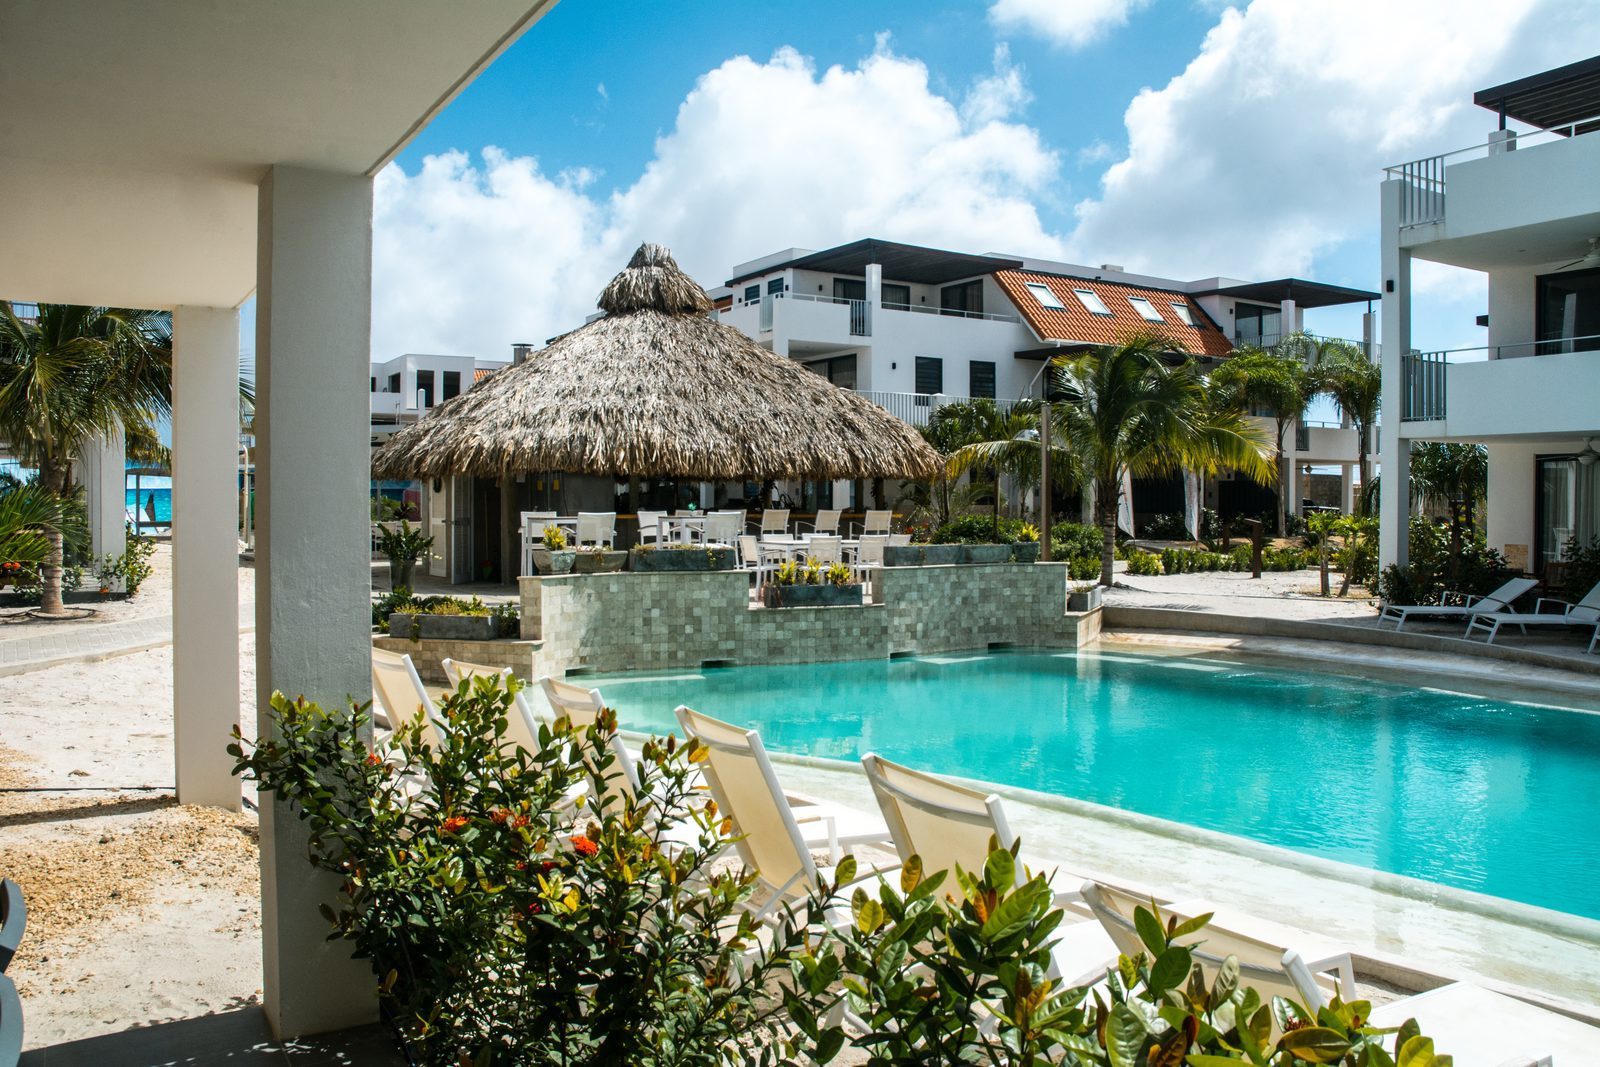 Looking for a resort on Bonaire? Resort Bonaire offers a beautiful swimming pool and luxurious apartments.